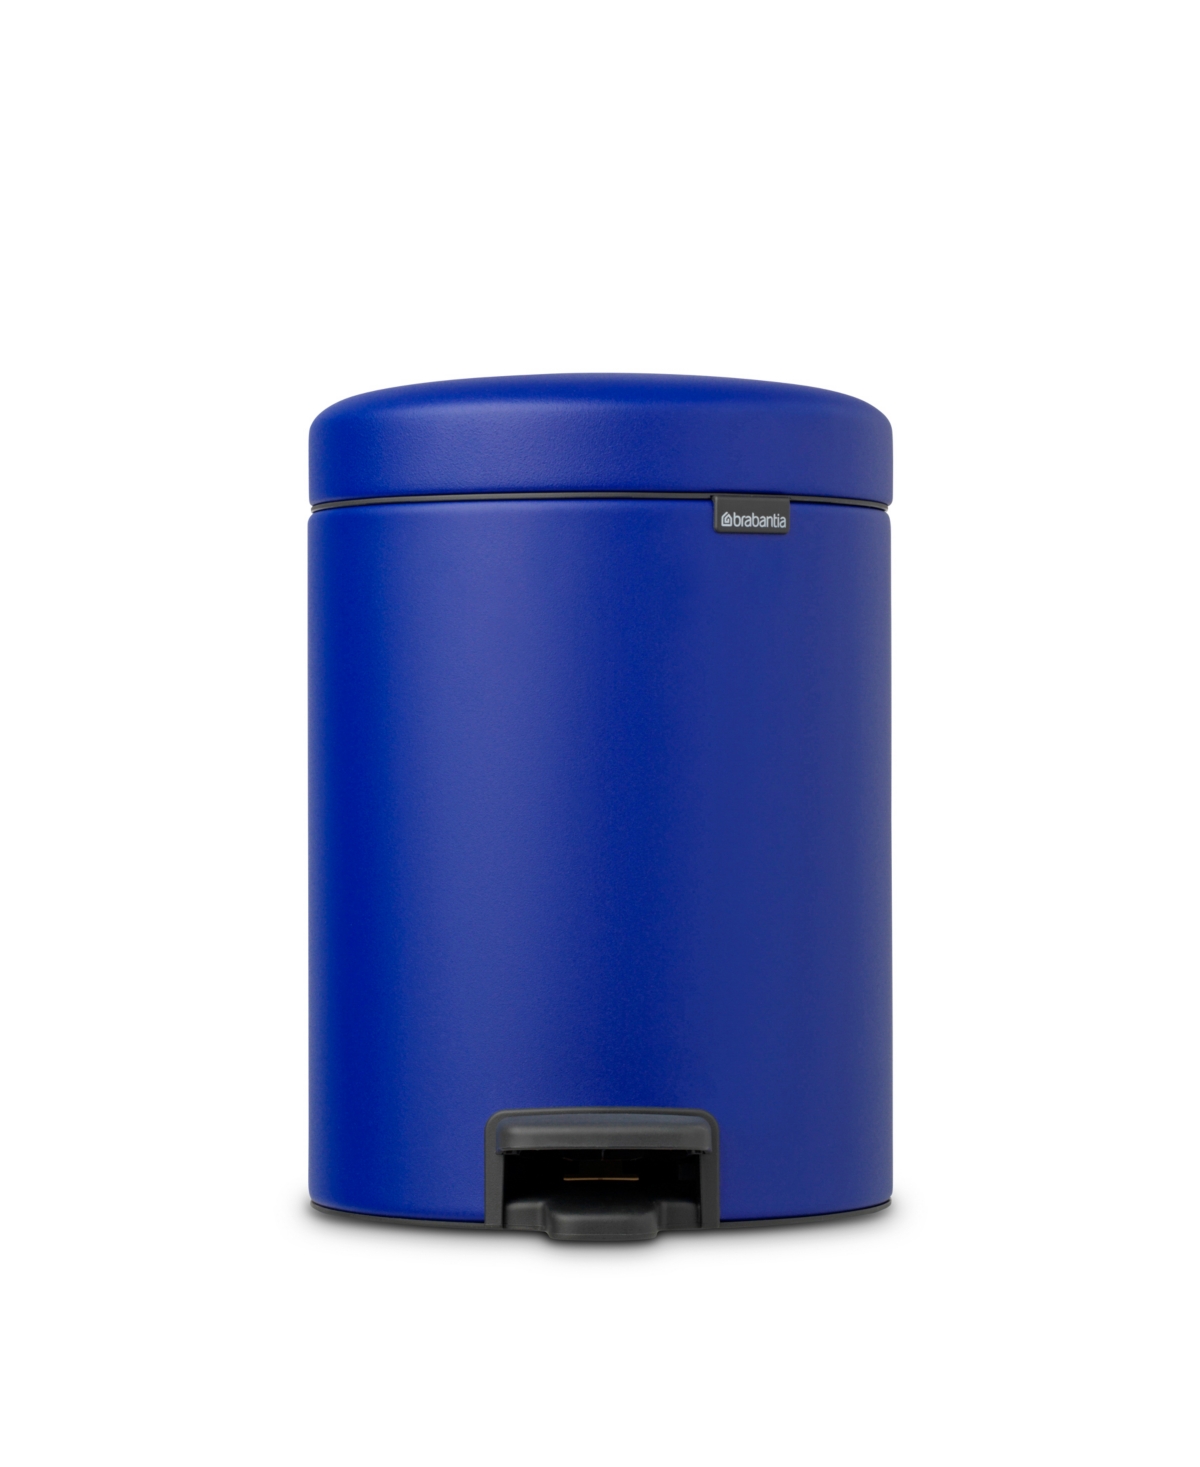 Brabantia New Icon Step On Trash Can, 1.3 Gallon, 5 Liter In Mineral Powerful Blue